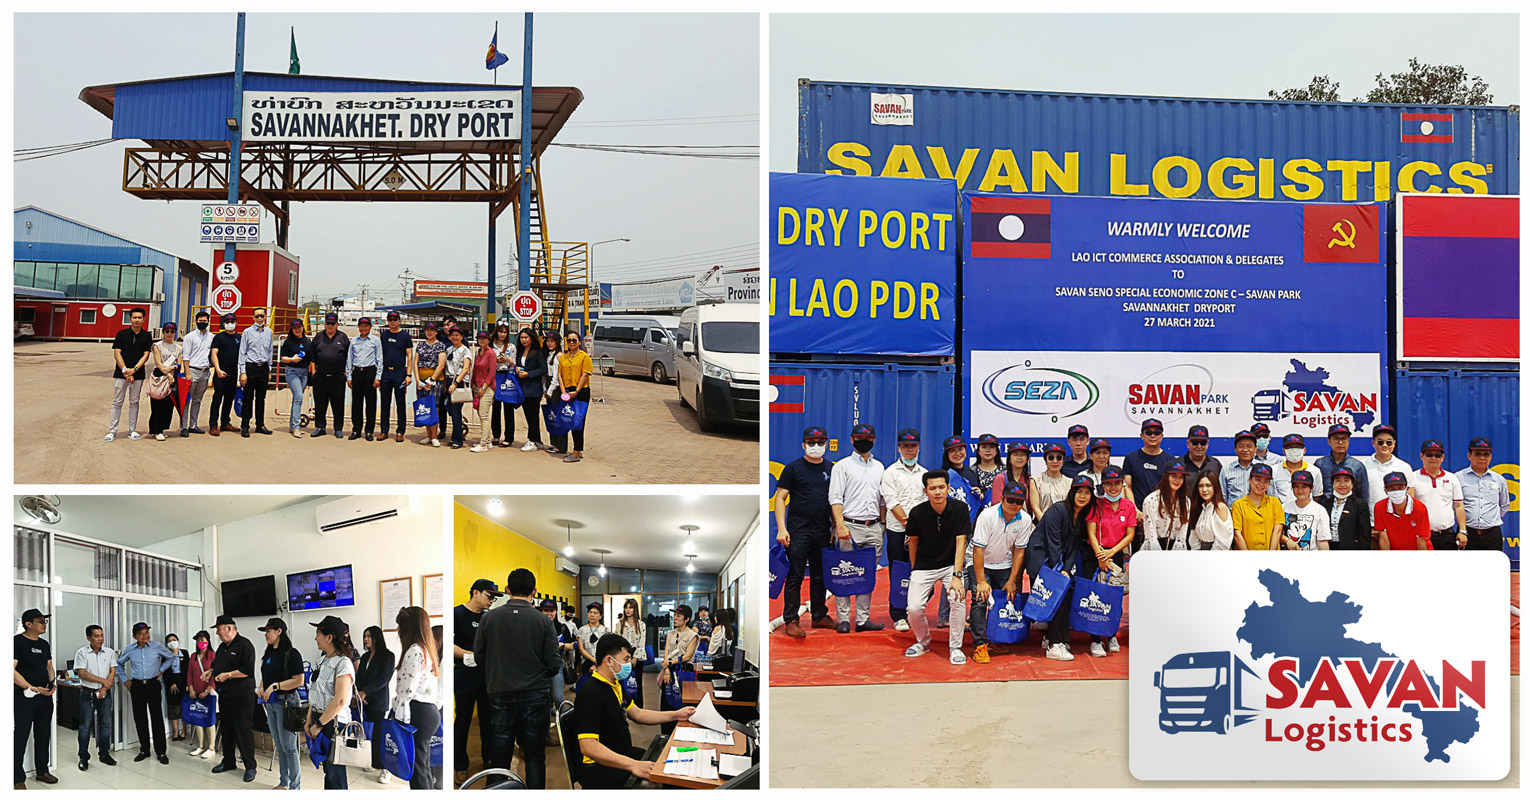 Savan Logistics Welcomes a Delegation from the Lao National Chamber of Commerce and Industry (LNCCI) and The Lao ICT Commerce Association (LICA) to visit Special Economic Zone C-Savan Park - Savannakhet Dry Port